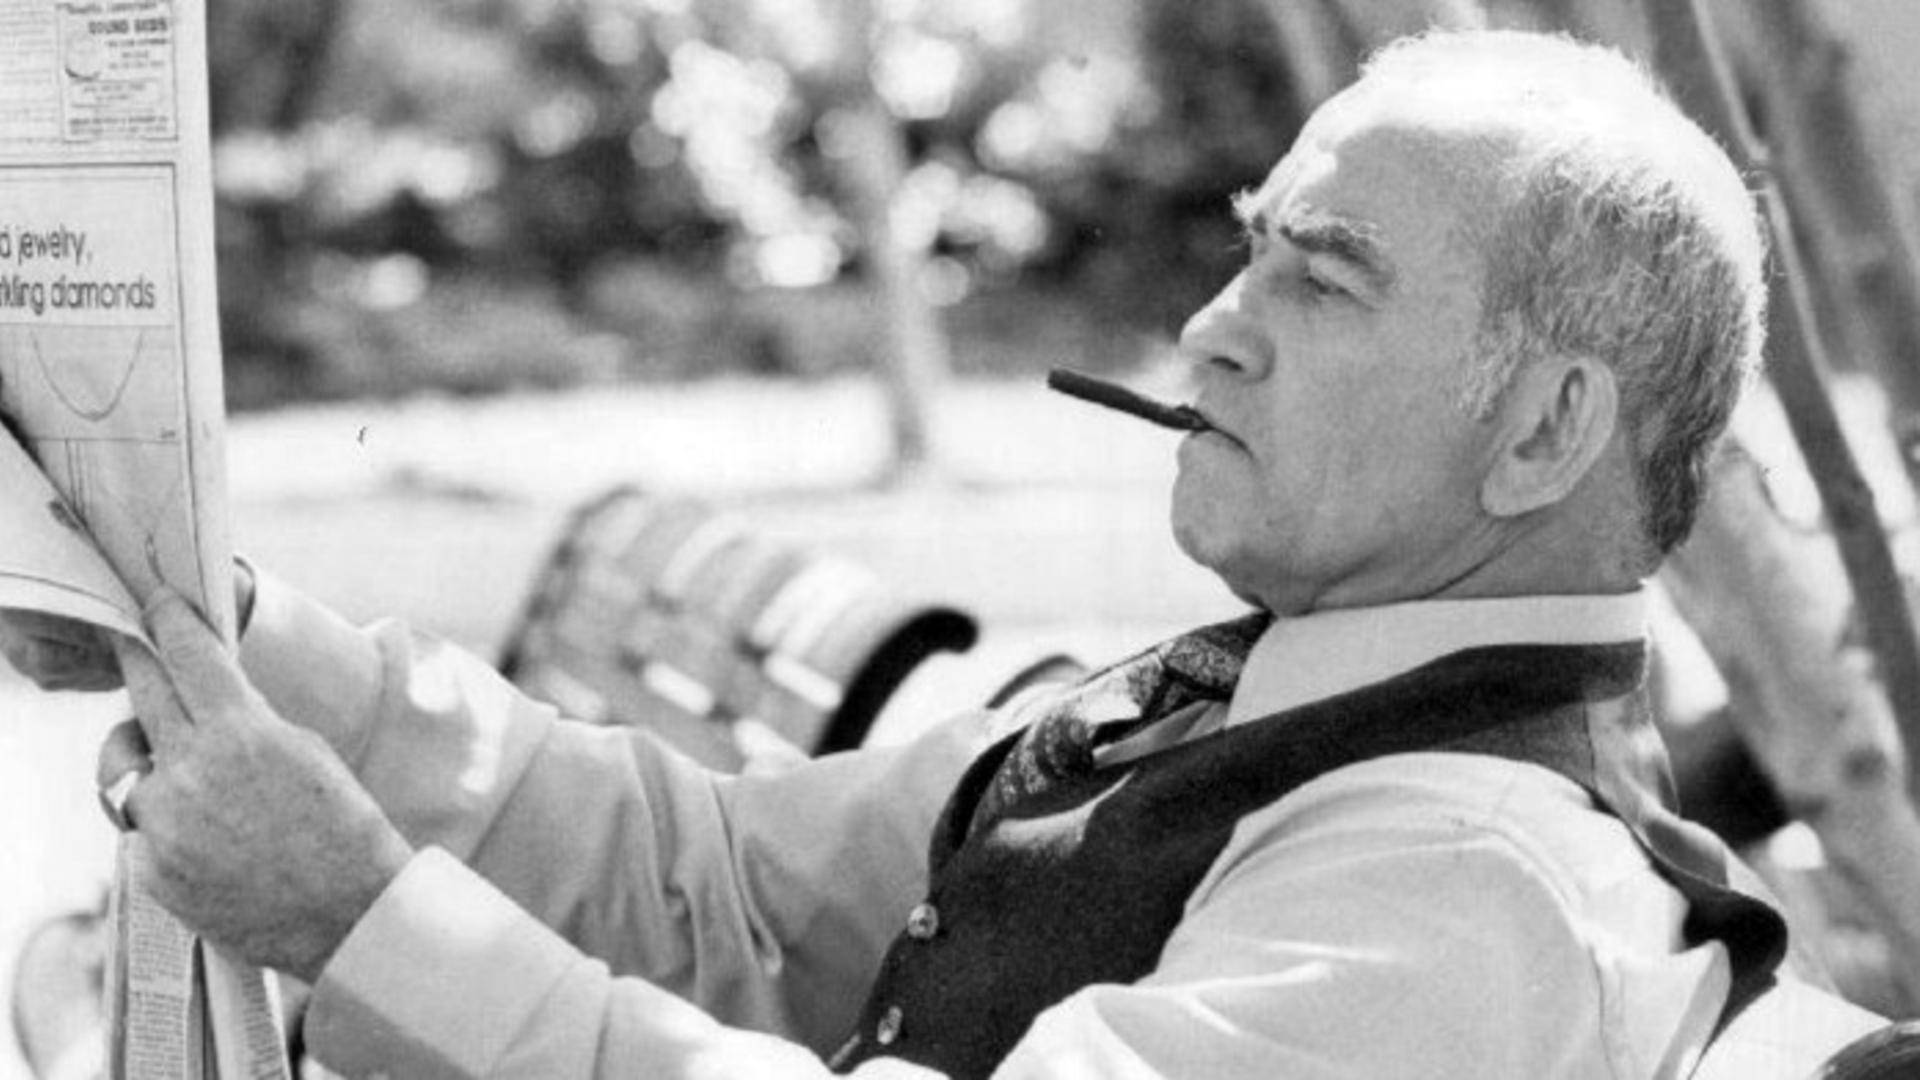 Edwardasner Svart Och Vit Rökning (for A Computer Or Mobile Wallpaper With An Image Of Edward Asner Smoking In Black And White) Wallpaper